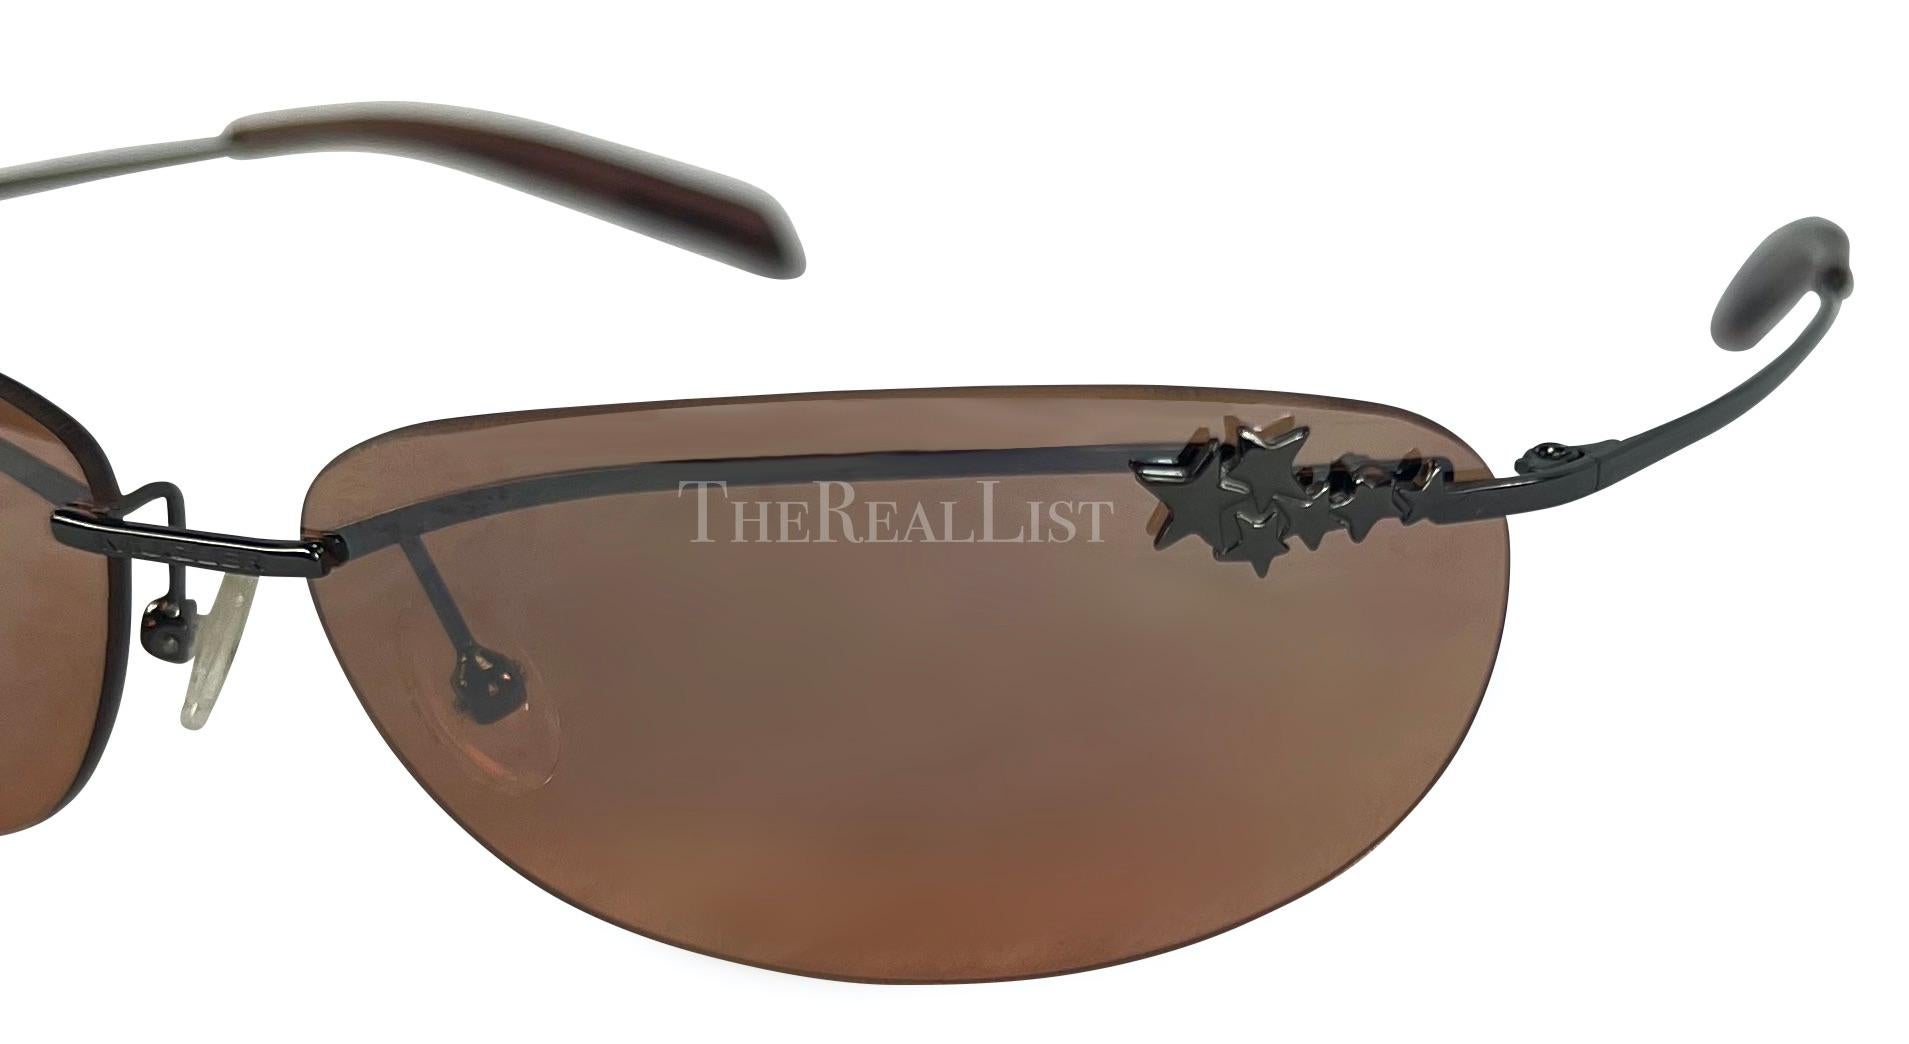 These brown Thierry Mugler sunglasses were designed by Manfred Mugler in the early 2000s. They have rimless brown-tinted lenses and thin metal arms, giving them a sleek, minimalist look. The design is distinguished by Mugler's signature star accents